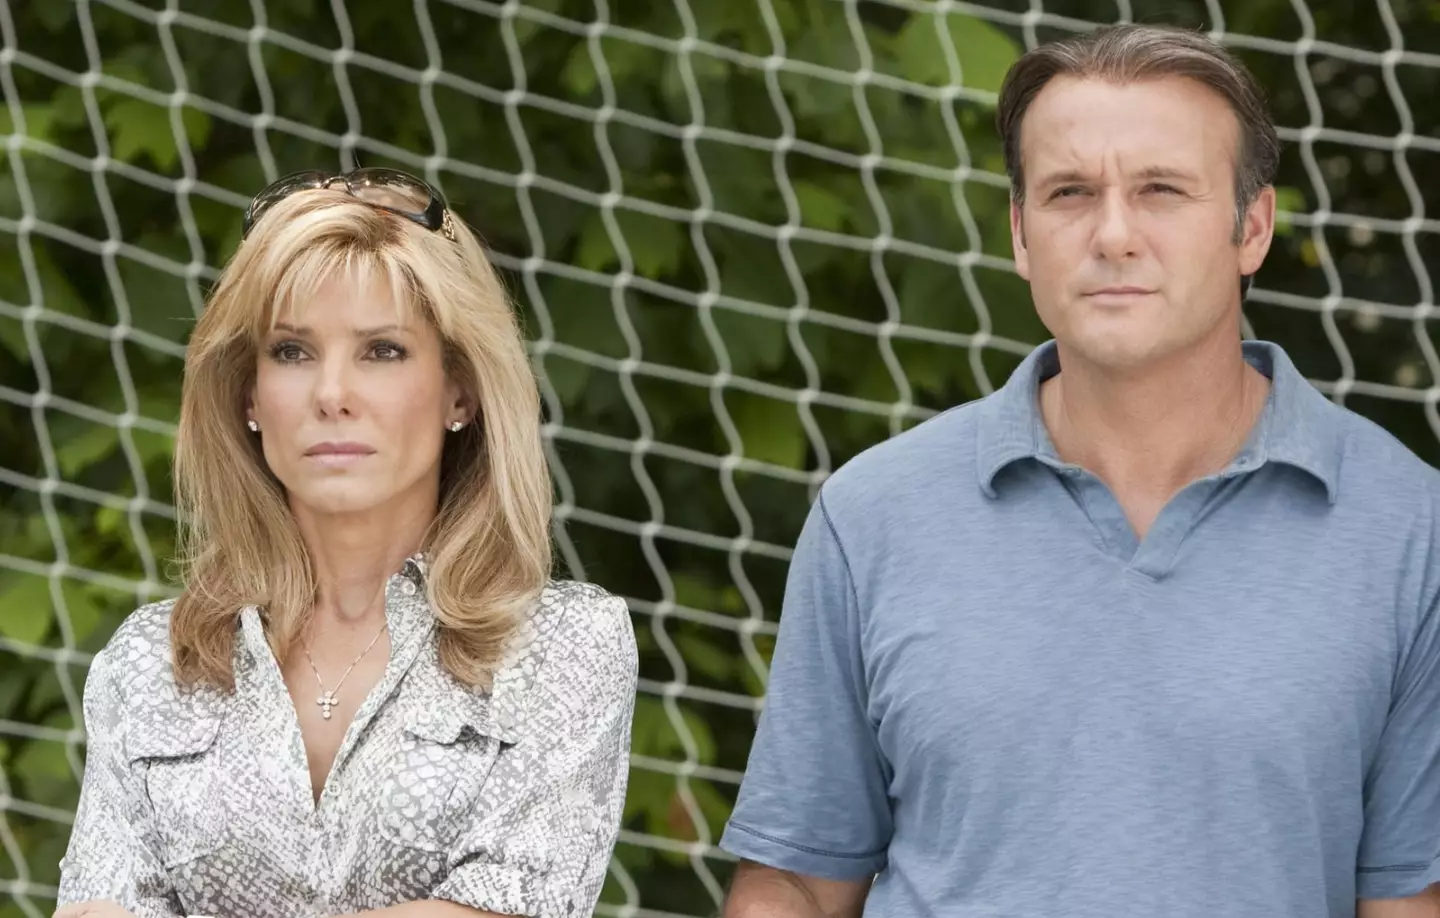 The Blind Side was based on Michael Oher's story with the Tuohy family.